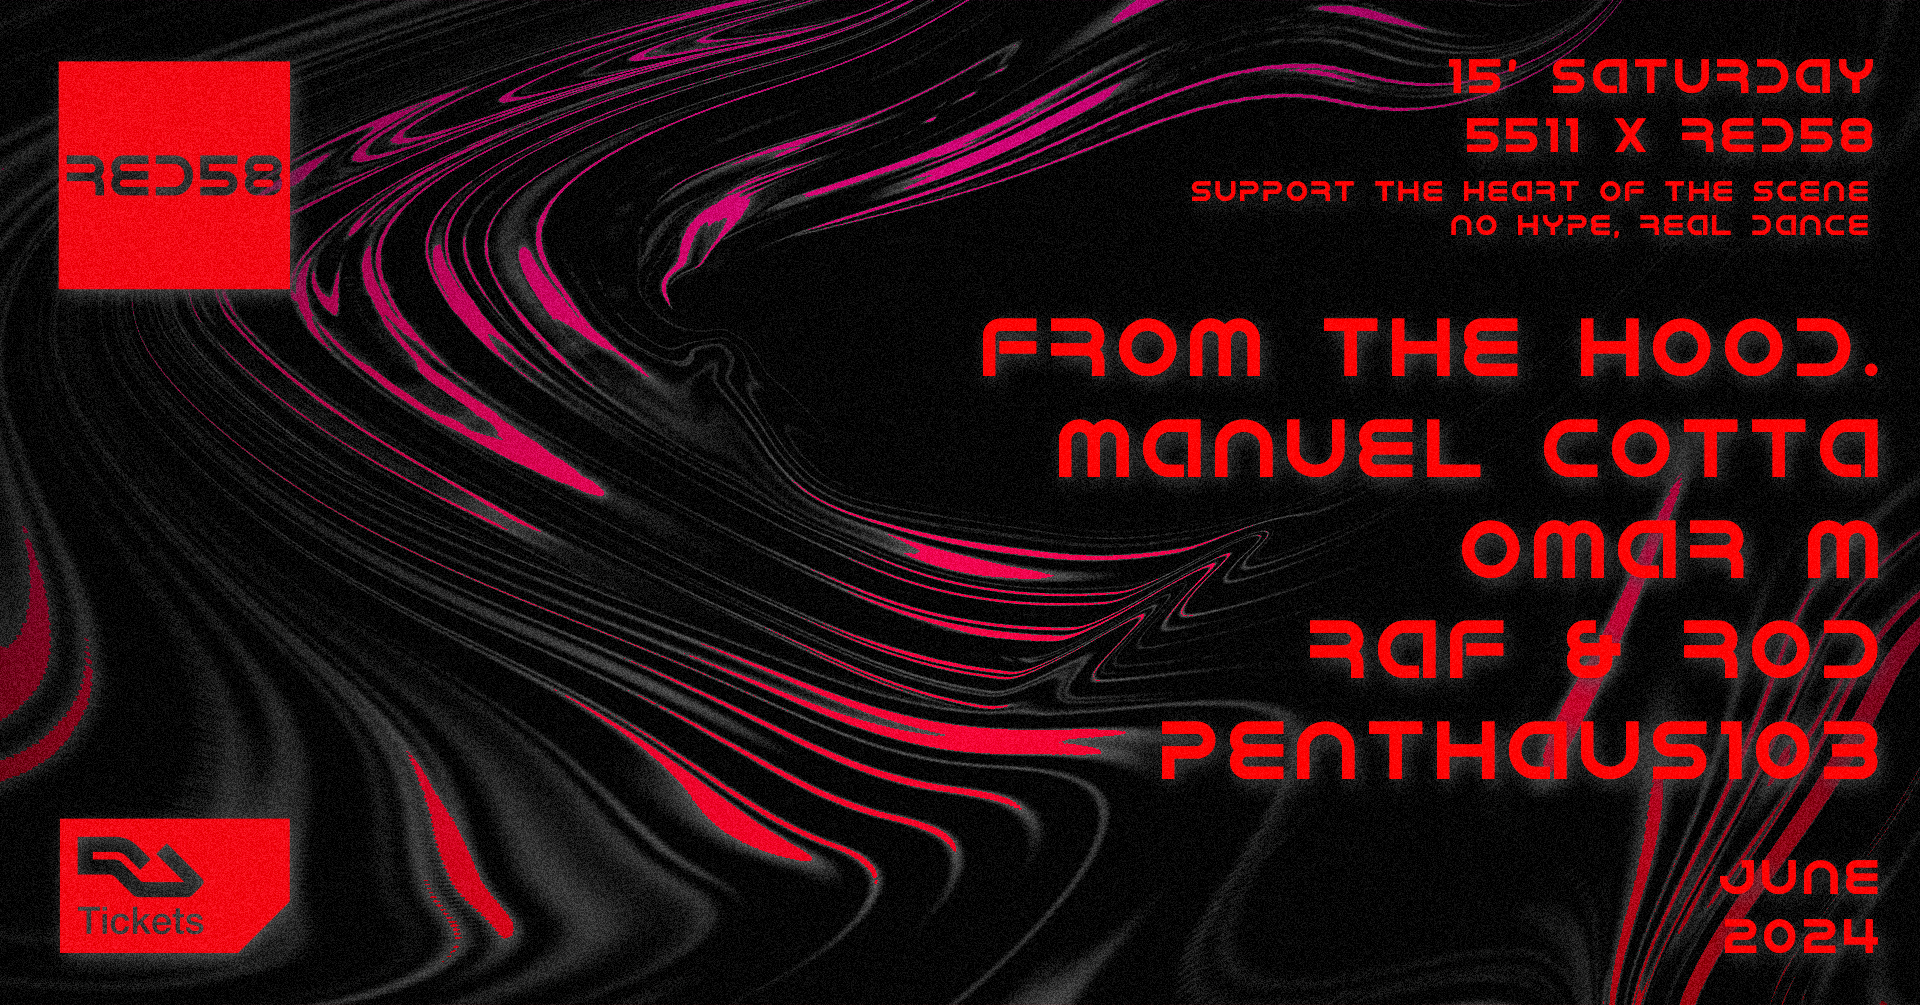 5511 x RED58 'From the hood' with Manuel Cotta, Omar M, Raf & Rod & Penthaus103 - Página frontal